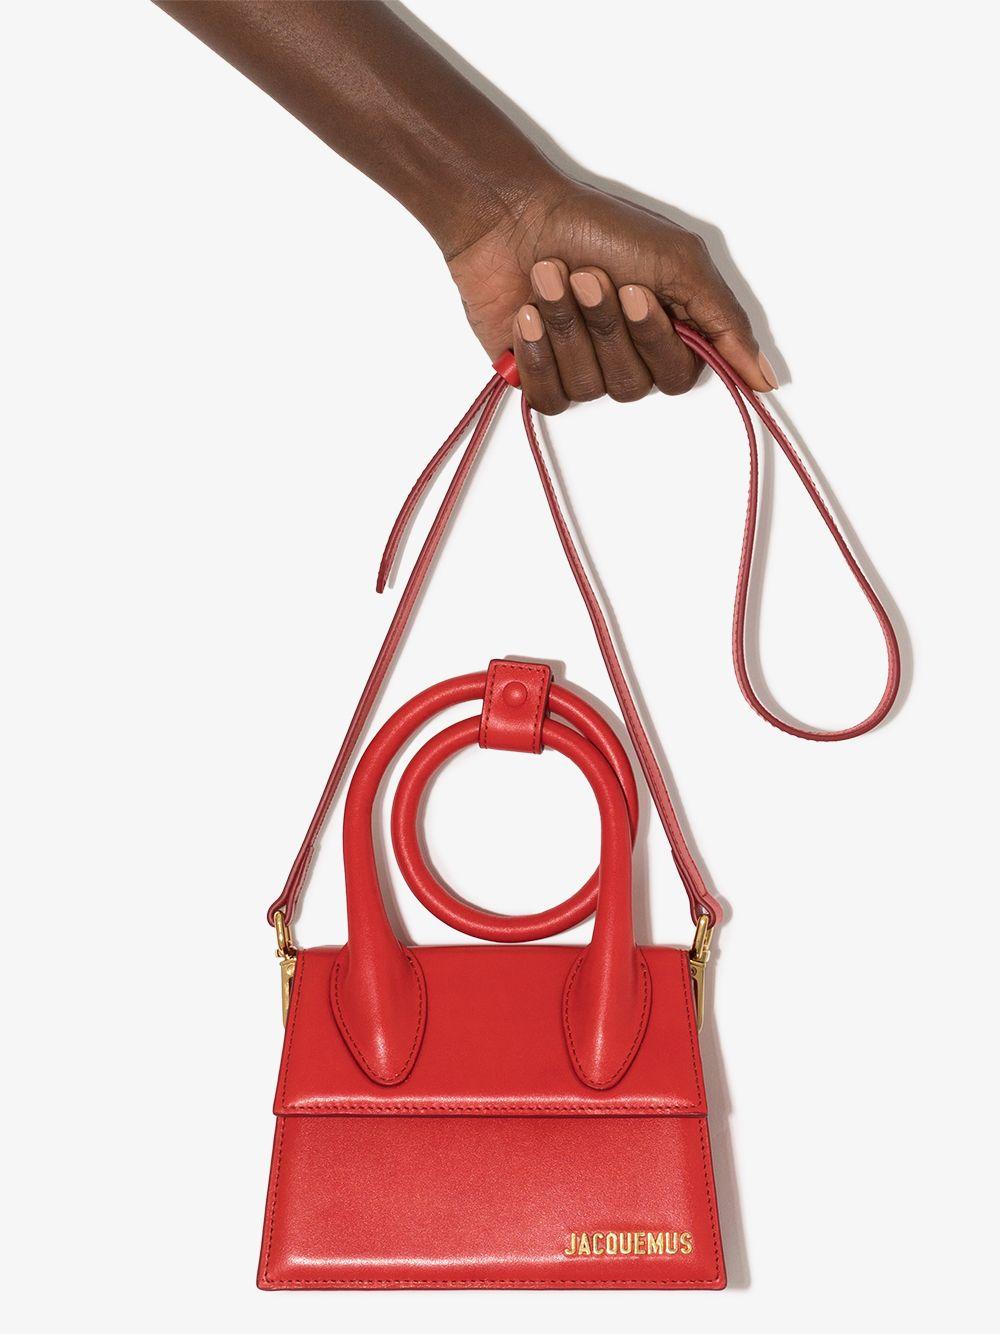 Jacquemus Le Chiquito Noeud Leather Mini Bag in Red | Lyst